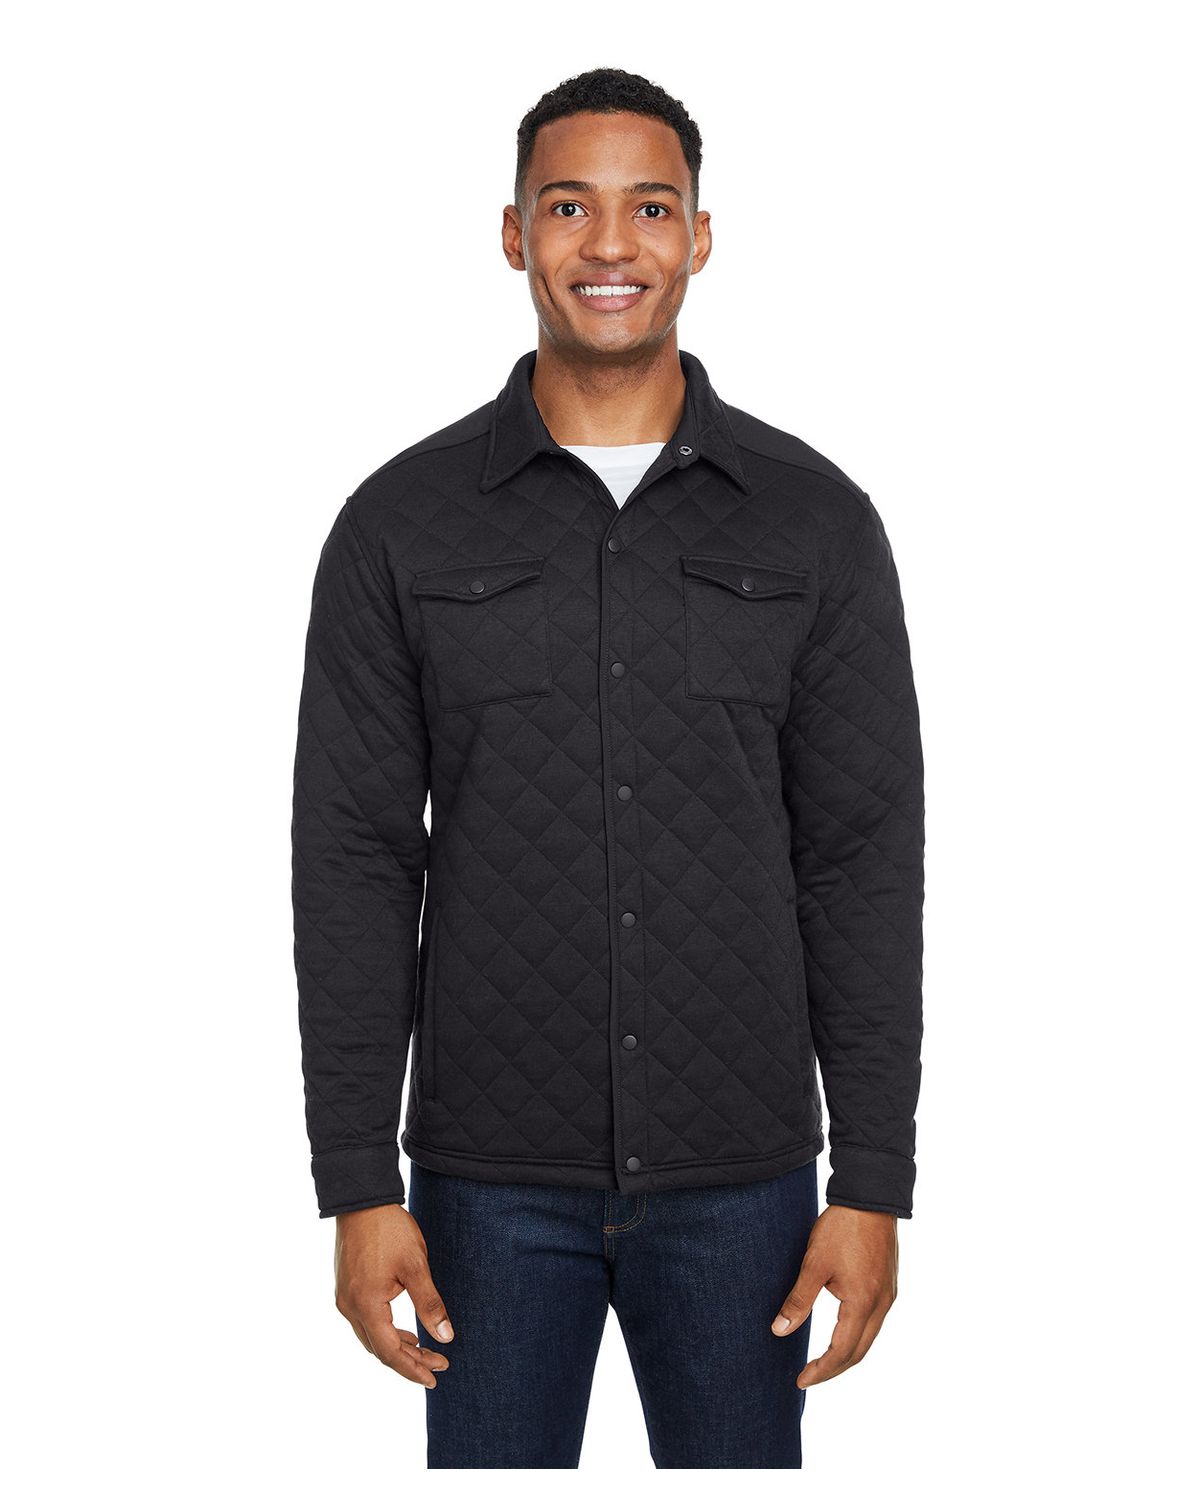 'J America JA8889 Adult Quilted Jersey Shirt Jacket'